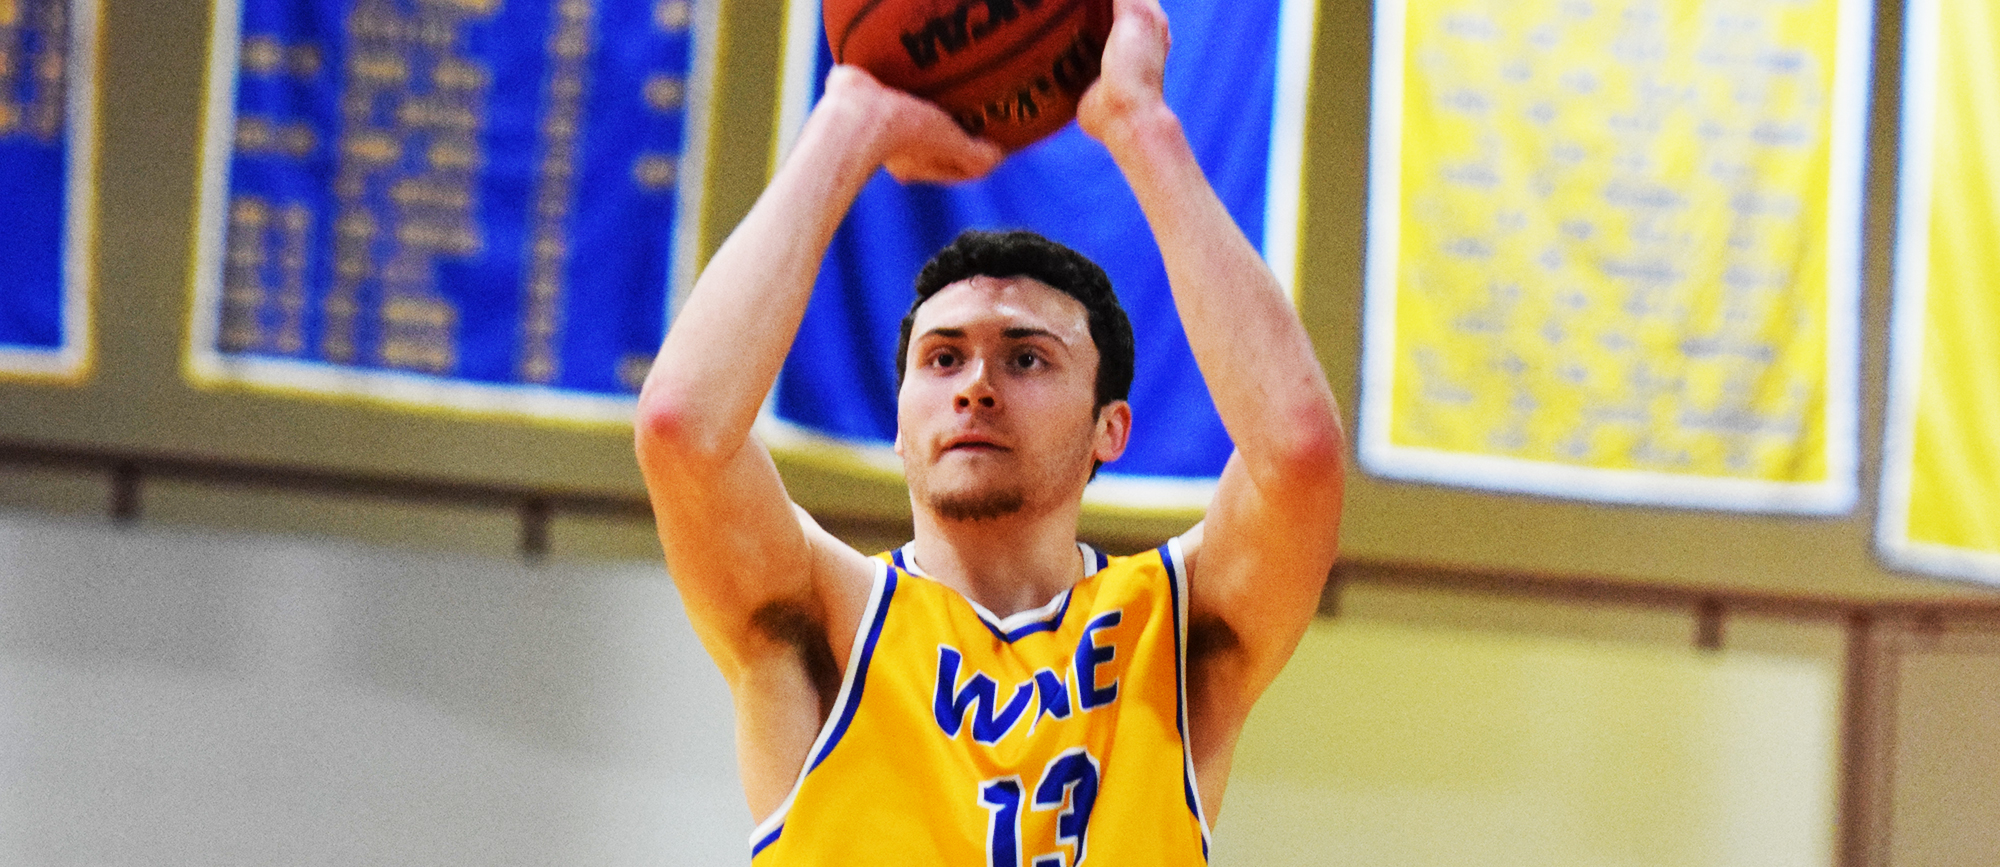 Freshman Alex Sikorski scored 16 points off the bench in Western New England's 91-79 win over Dean on Thursday. (Photo by Rachael Margossian)